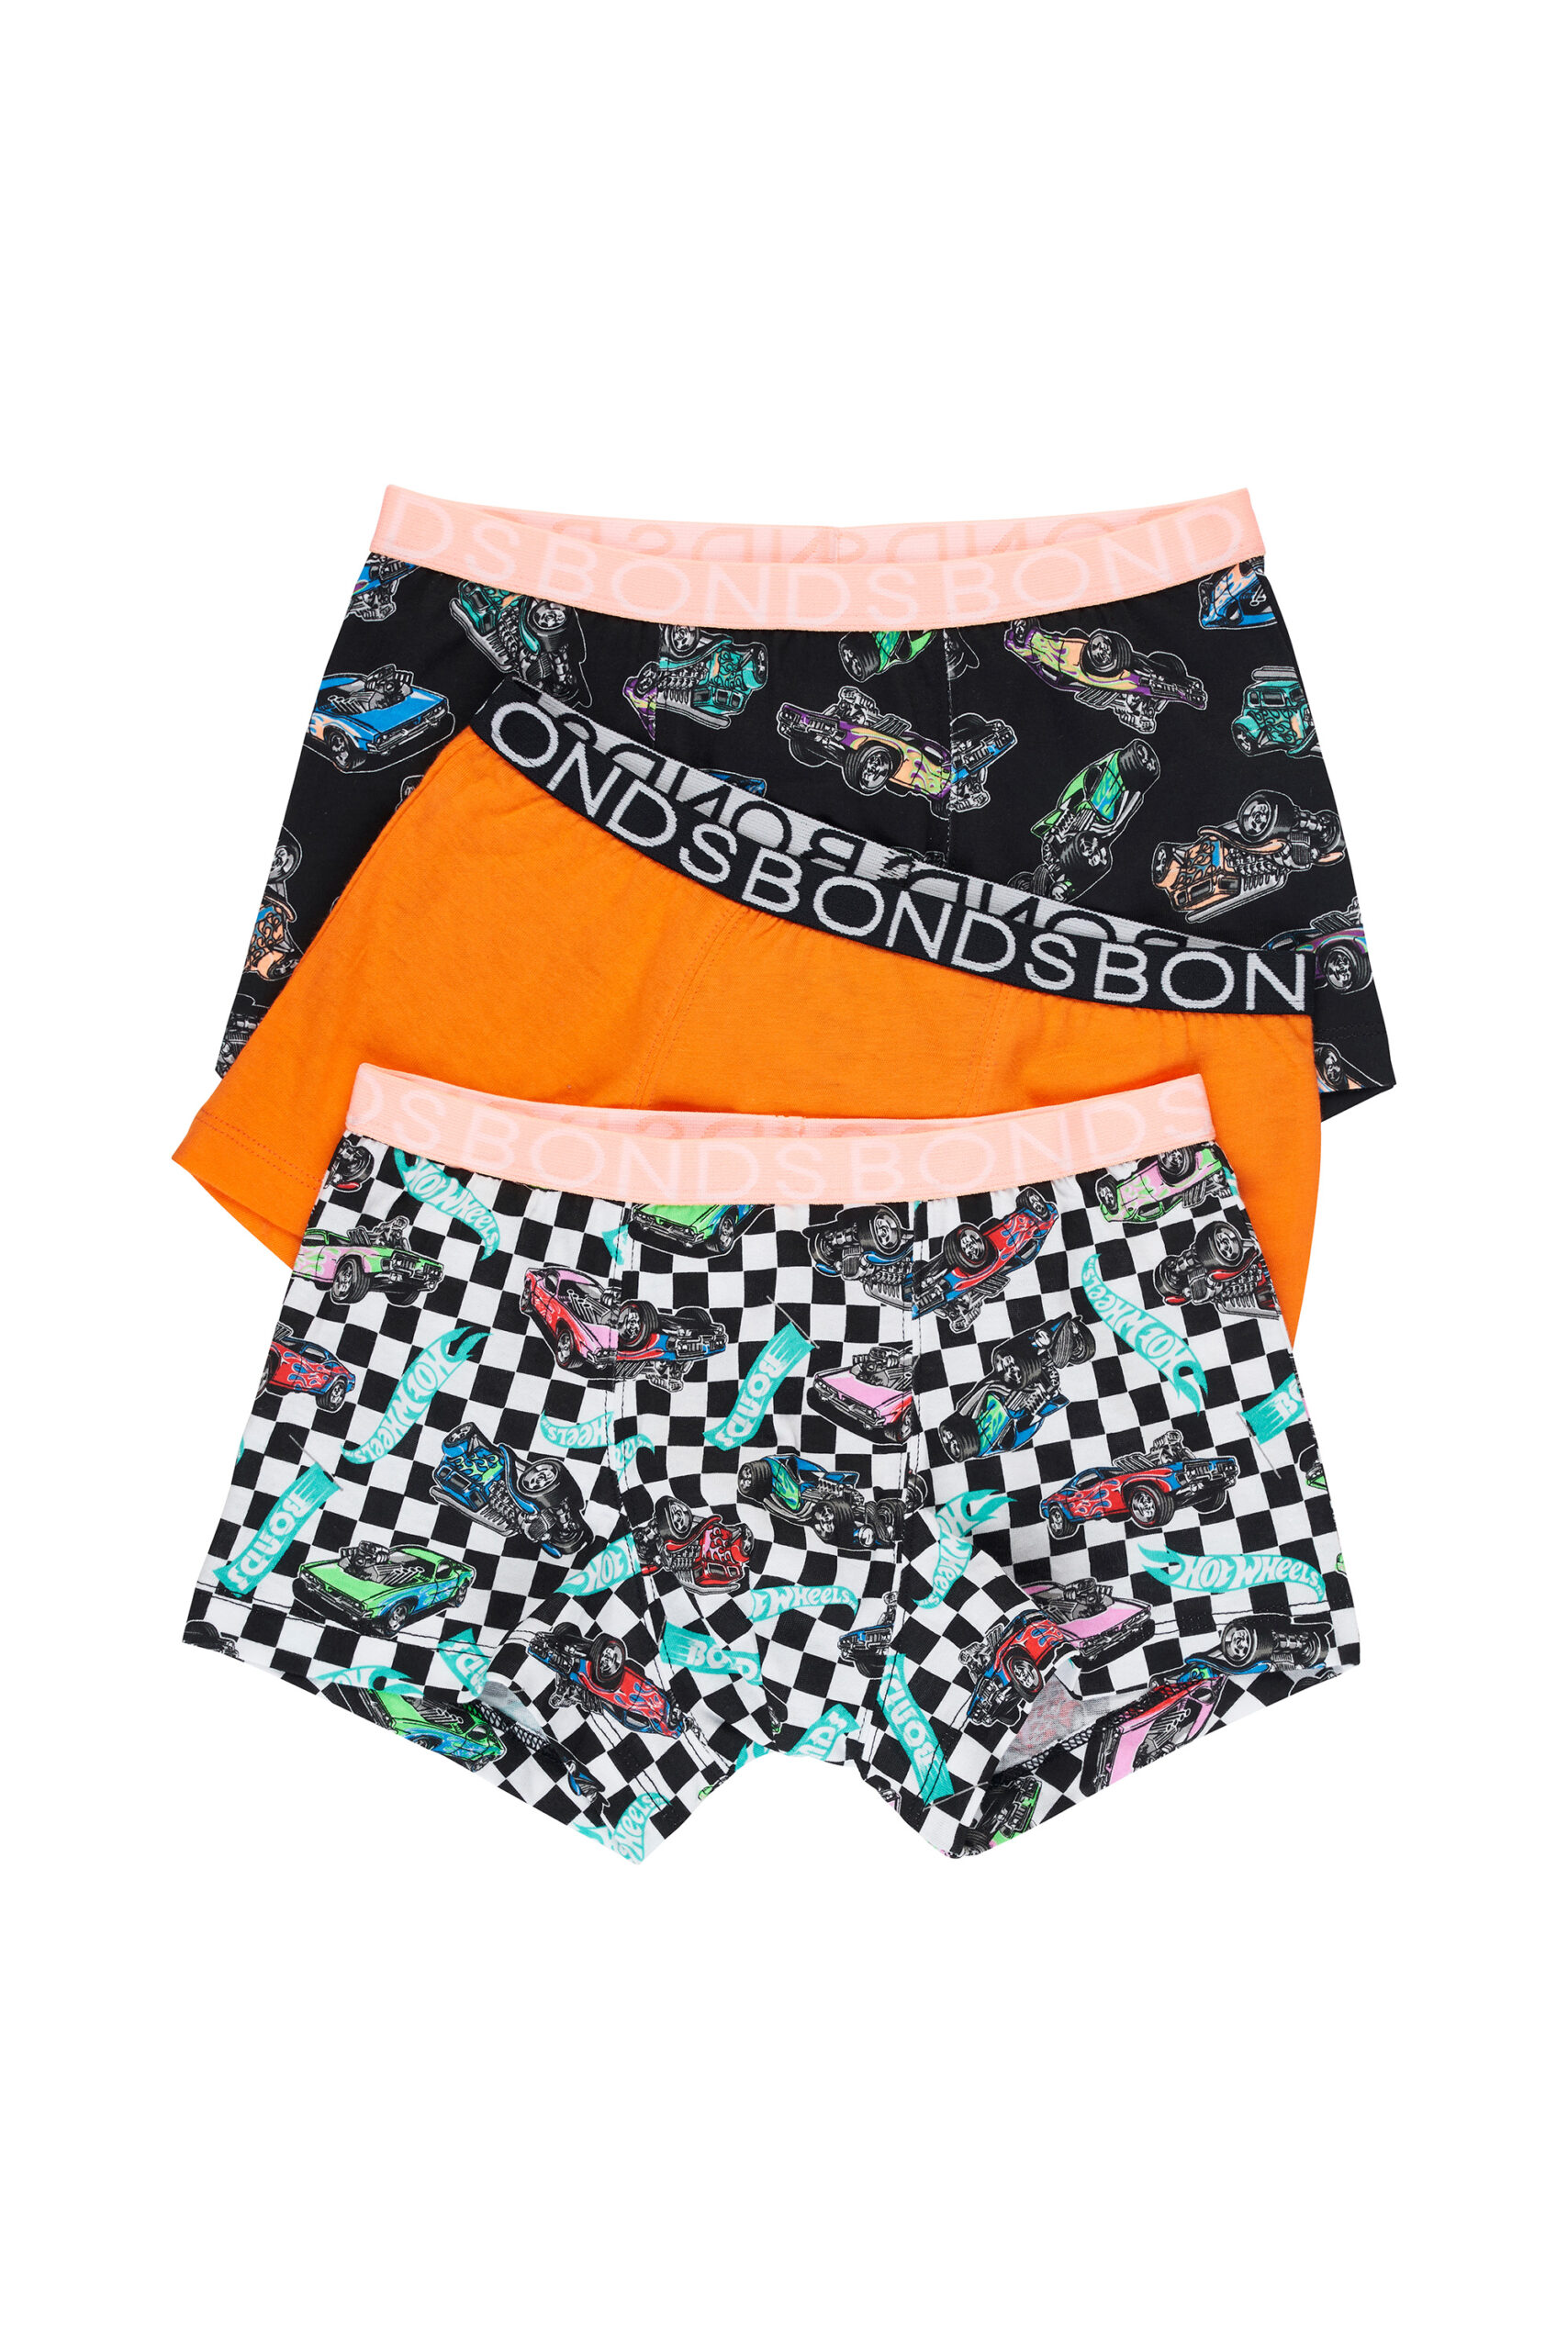 Purchase the Trunks/Boxers - Boys Hot Wheels/Bonds - 3 pack Online ...